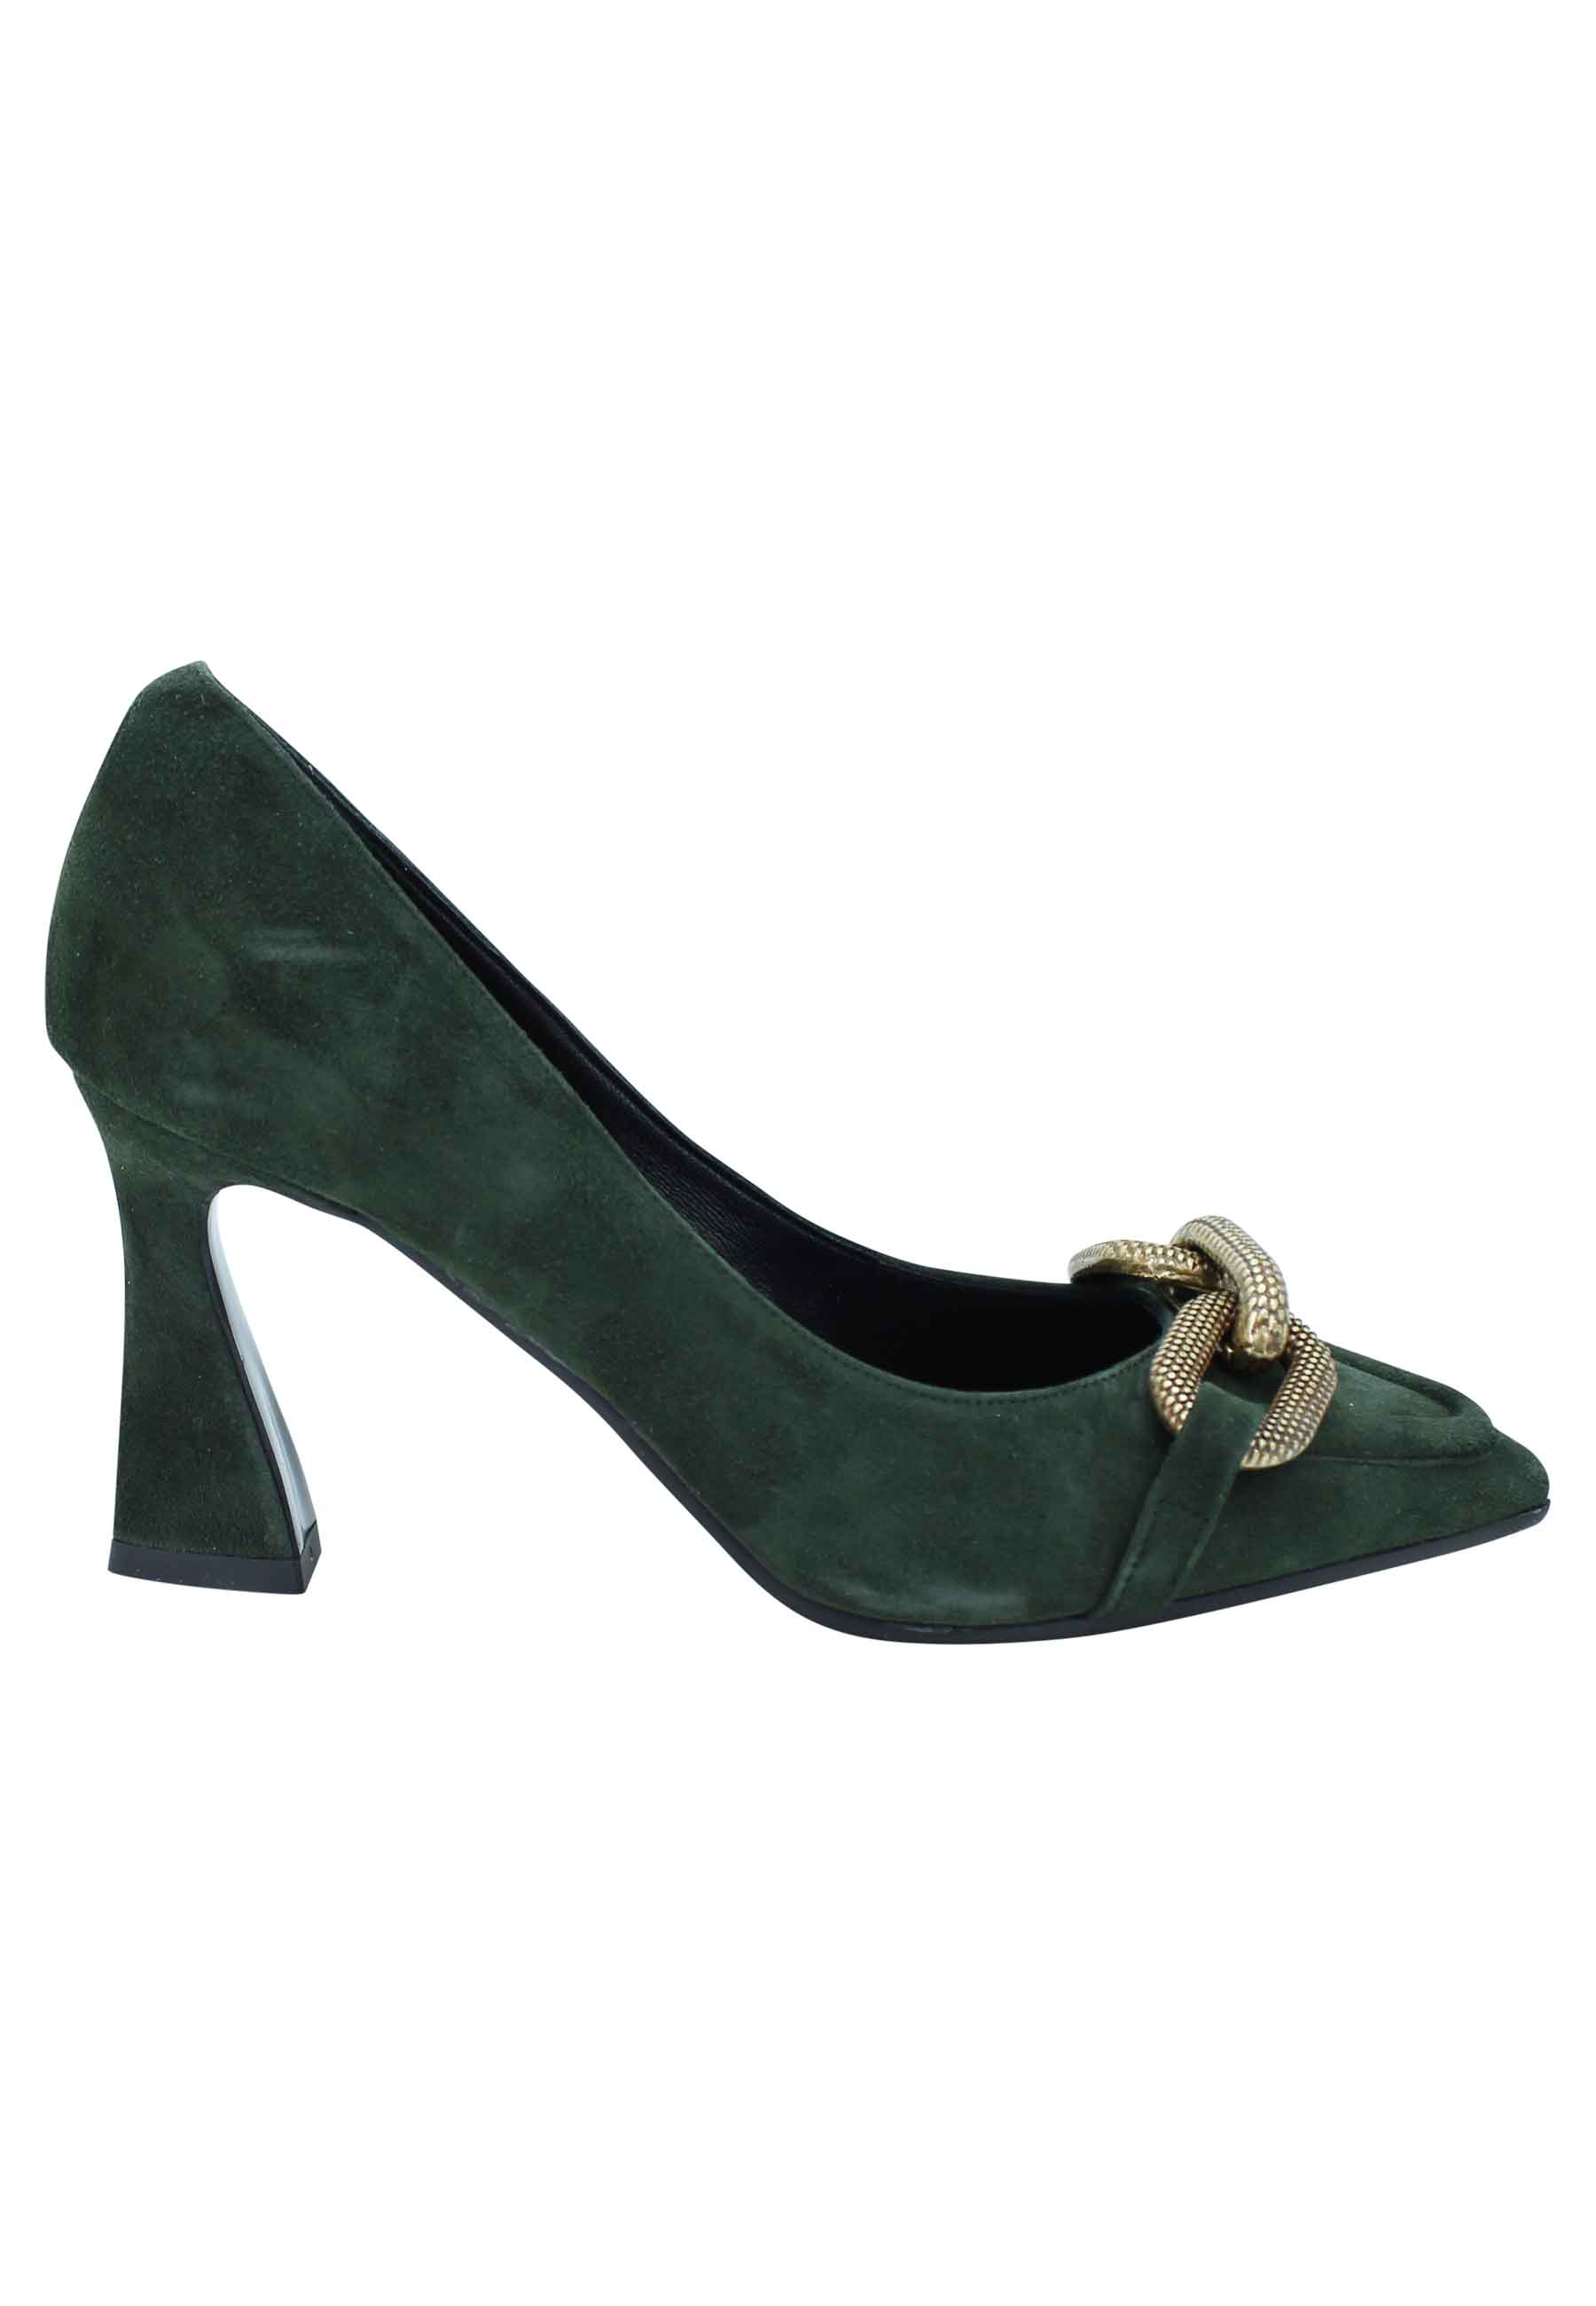 Women's high heel green suede pumps with burnished gold chain